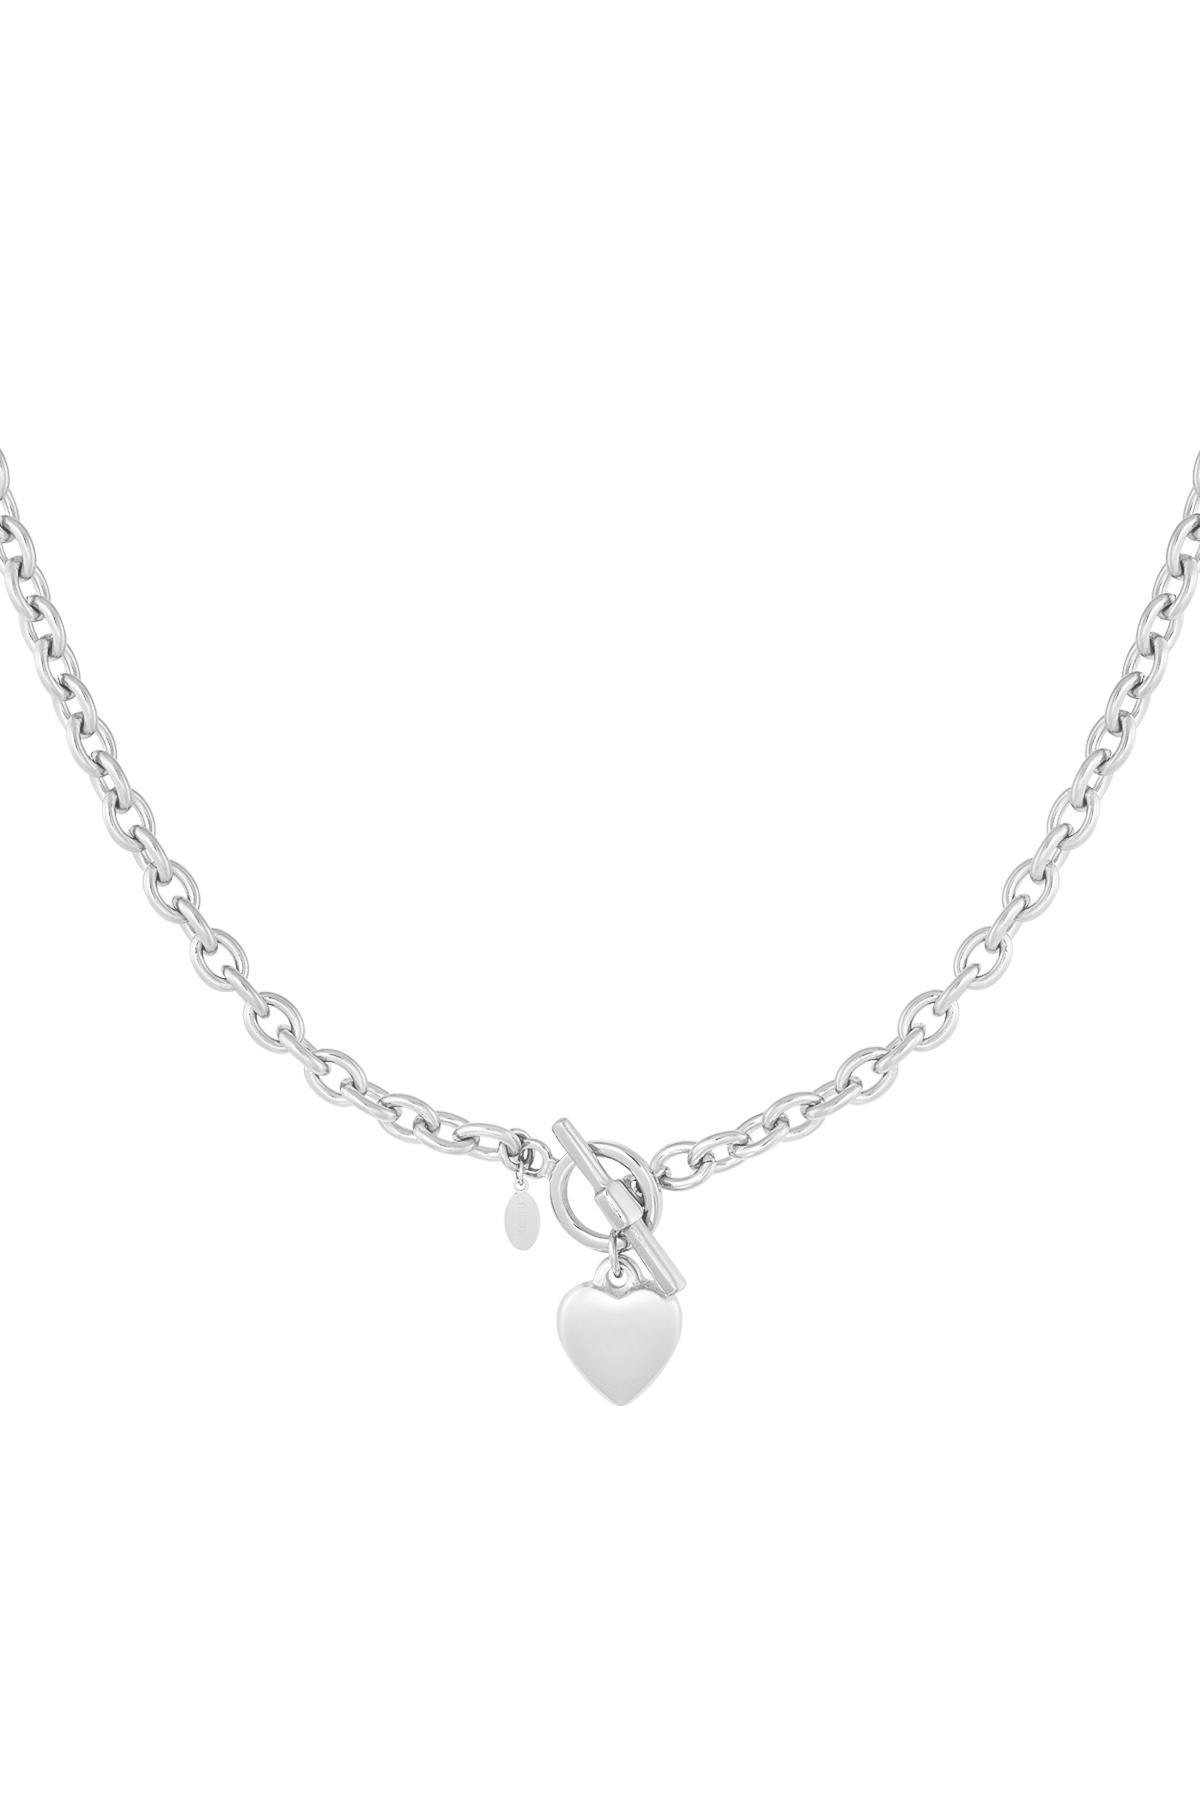 Link chain round closure with heart - silver